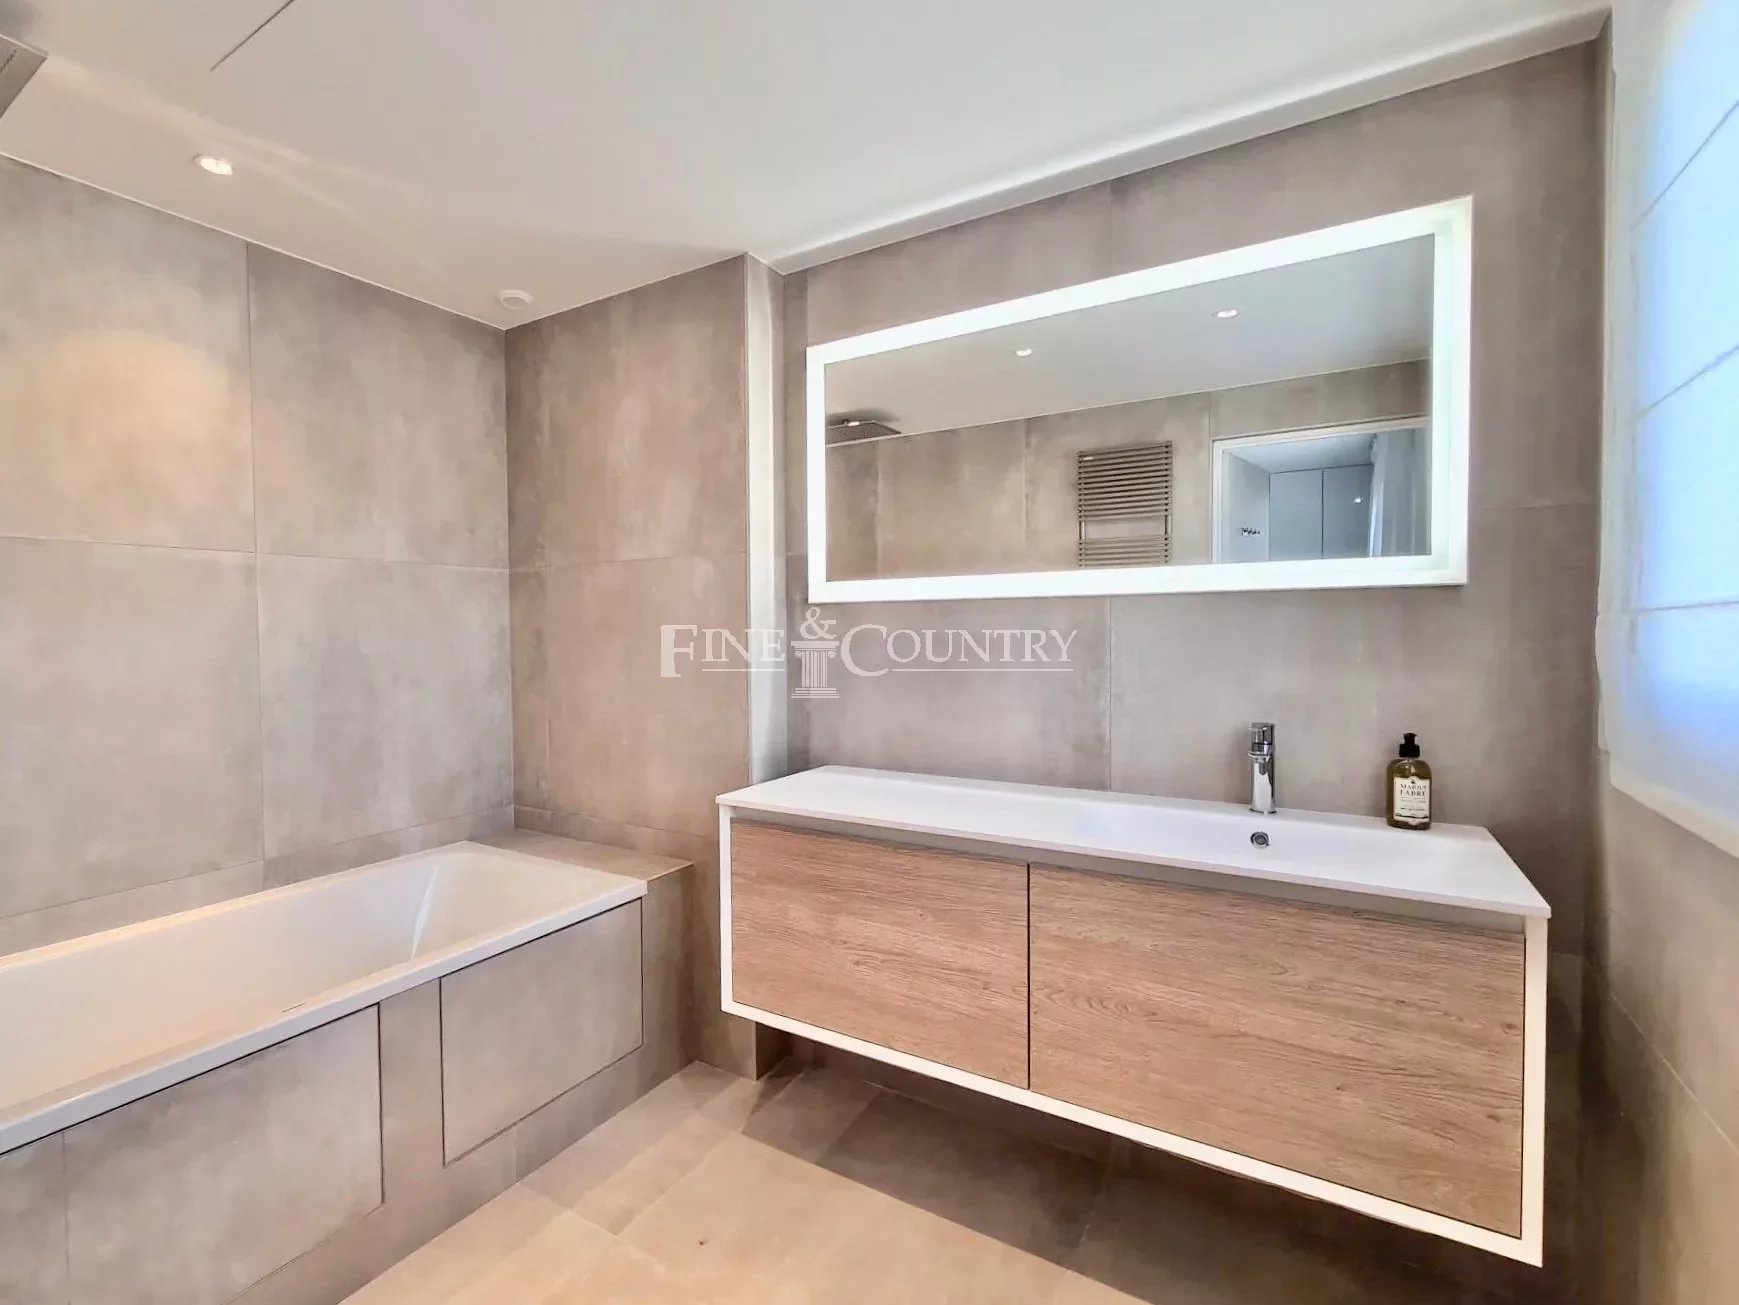 Luxury Penthouse for sale in Cannes